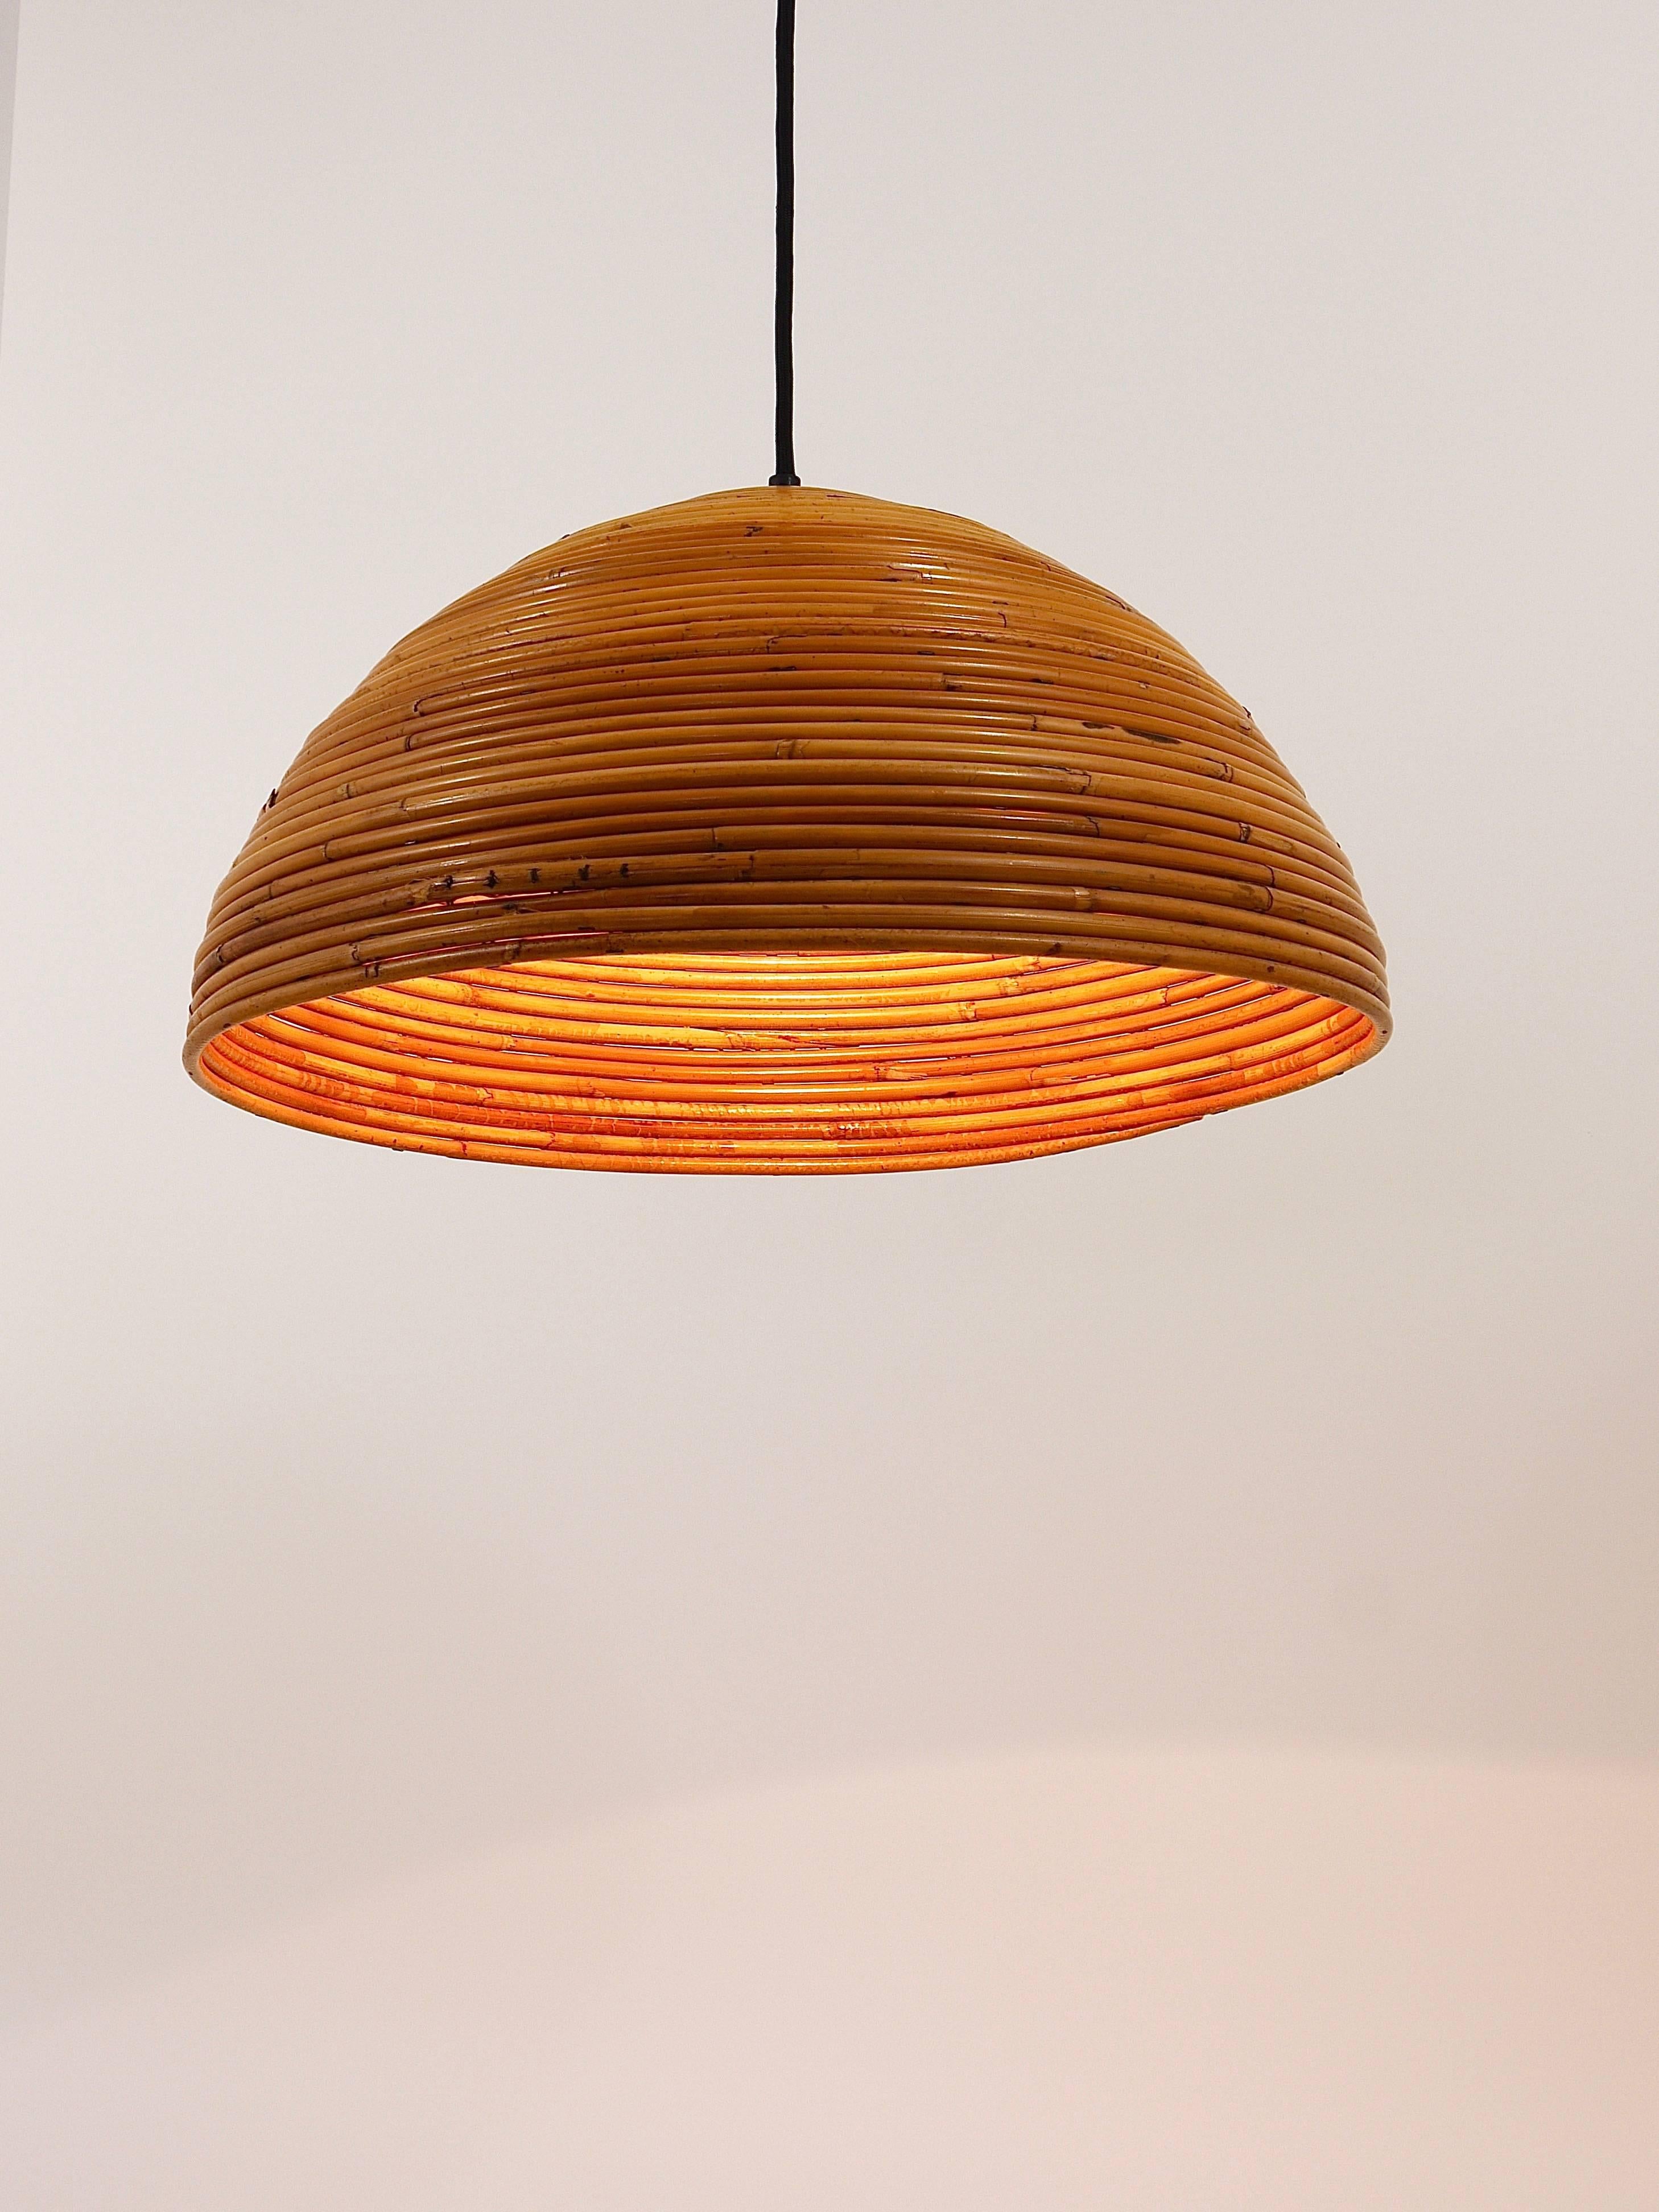 A beautiful hemisphere modernist pendant lamp from the 1960s, made in France. The lampshade is made of bamboo / rattan. In excellent condition, rewired with a black fabric cord. The lampshade has a diameter of 18 inand a height of 9 in, the cord is